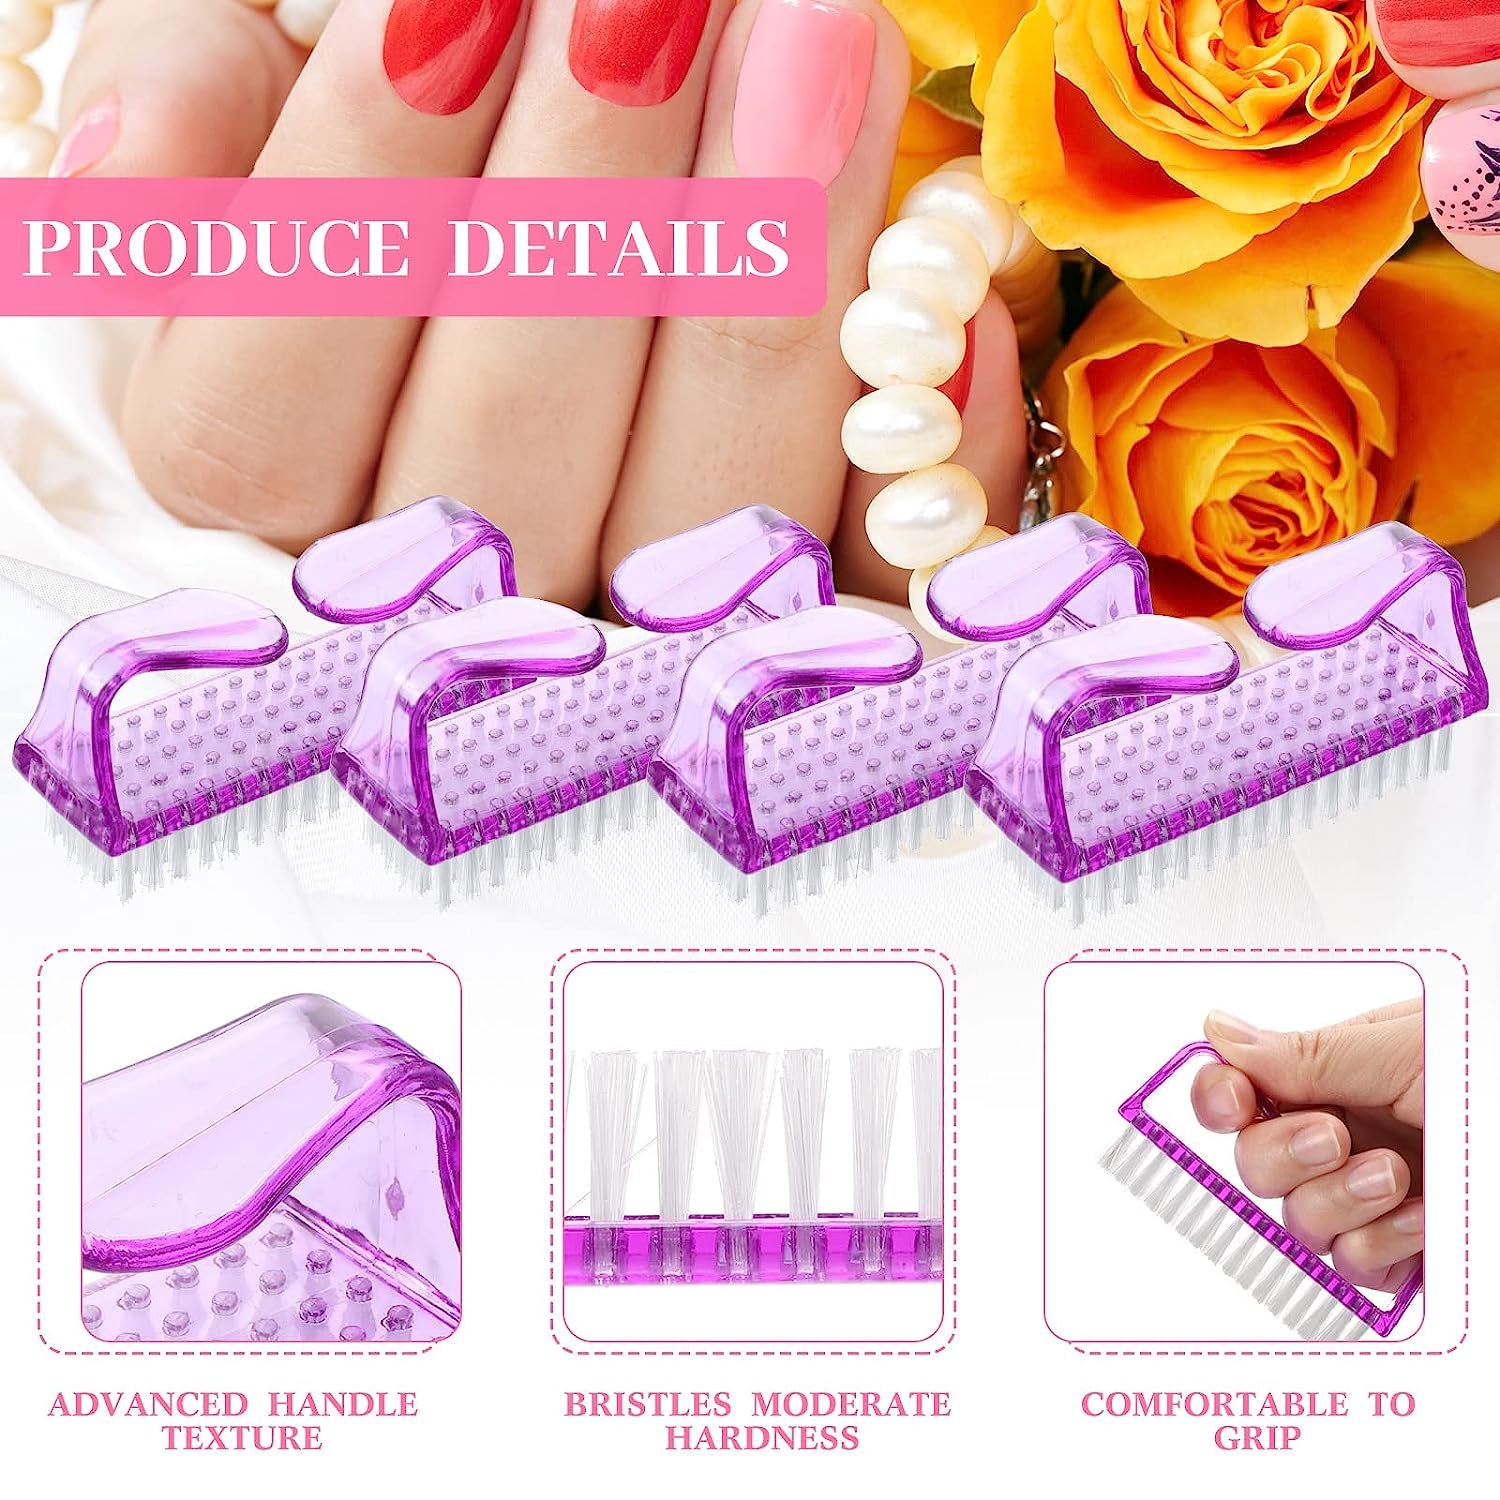 100 Pcs Nail Cleaning Brush Bulk Handle Grip Nail Brush Nail Brush Cleaner for Hands Feet Nail Cleaning Kit Pedicure for Toes and Nails Men Women, 3.15 X 1.57 X 1.02 Inches